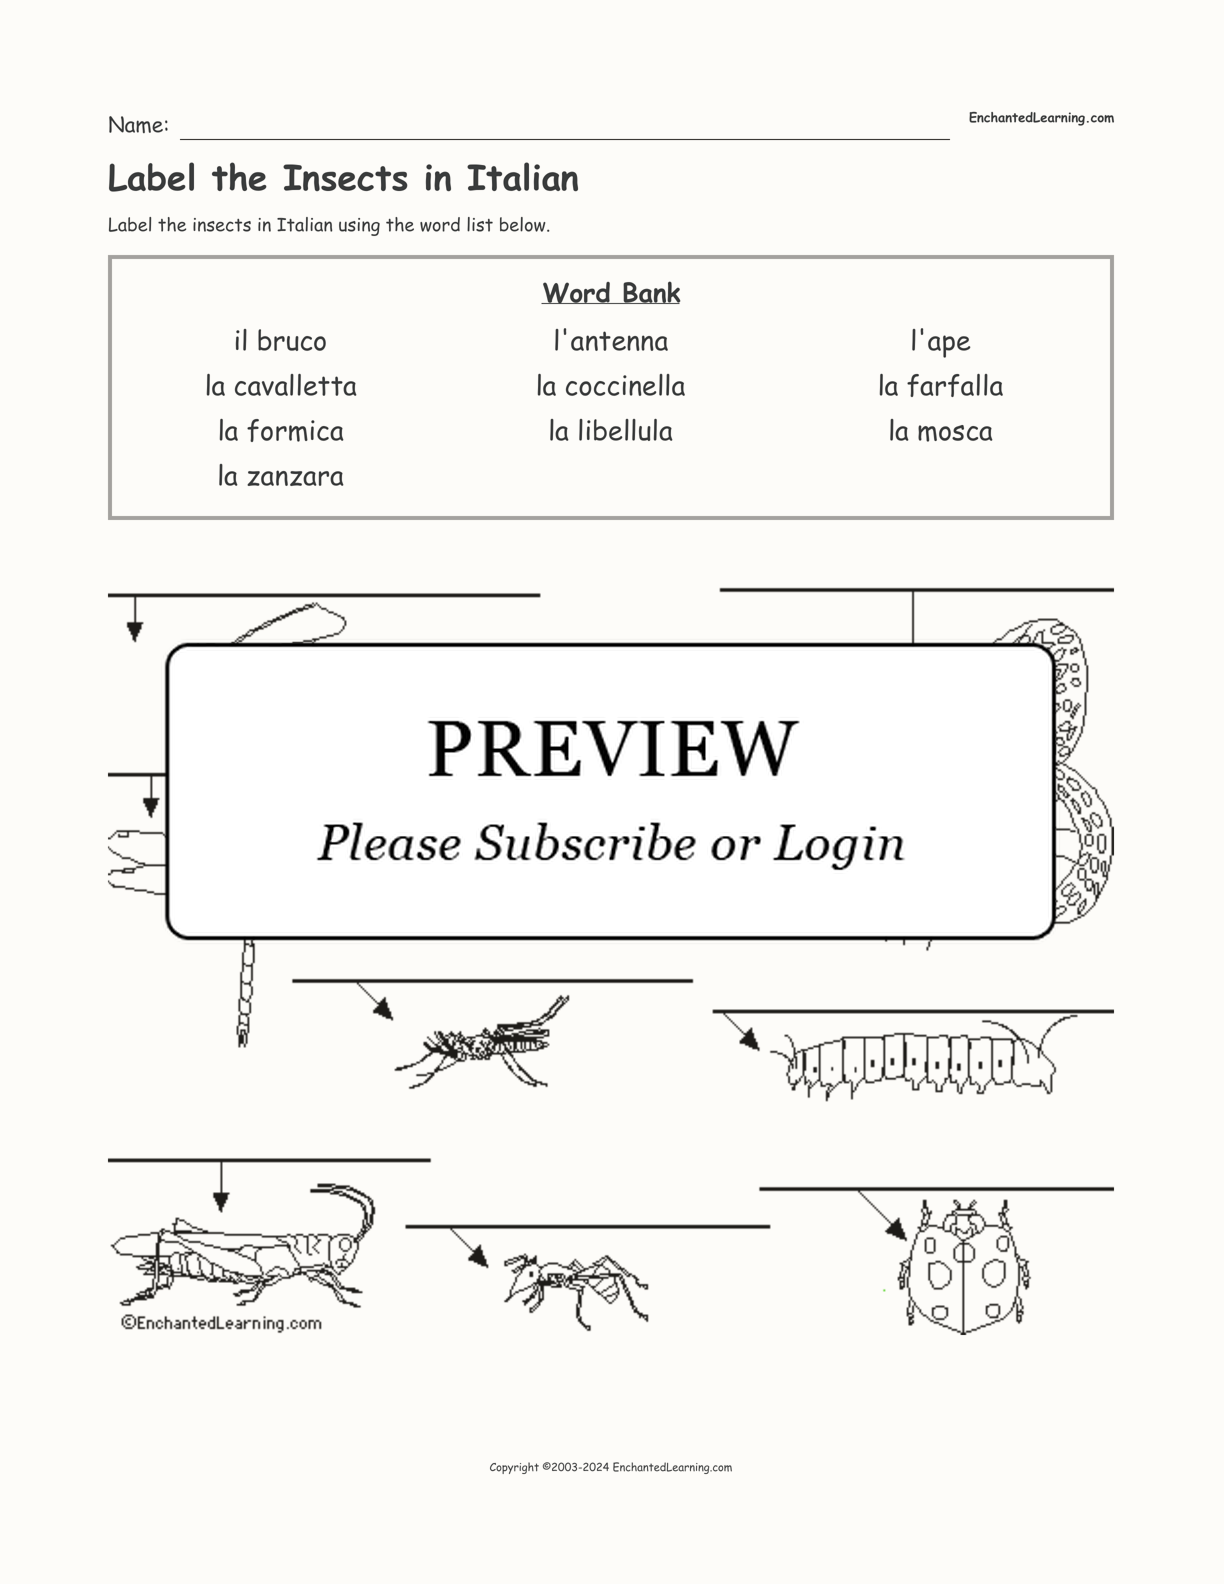 Label the Insects in Italian interactive worksheet page 1